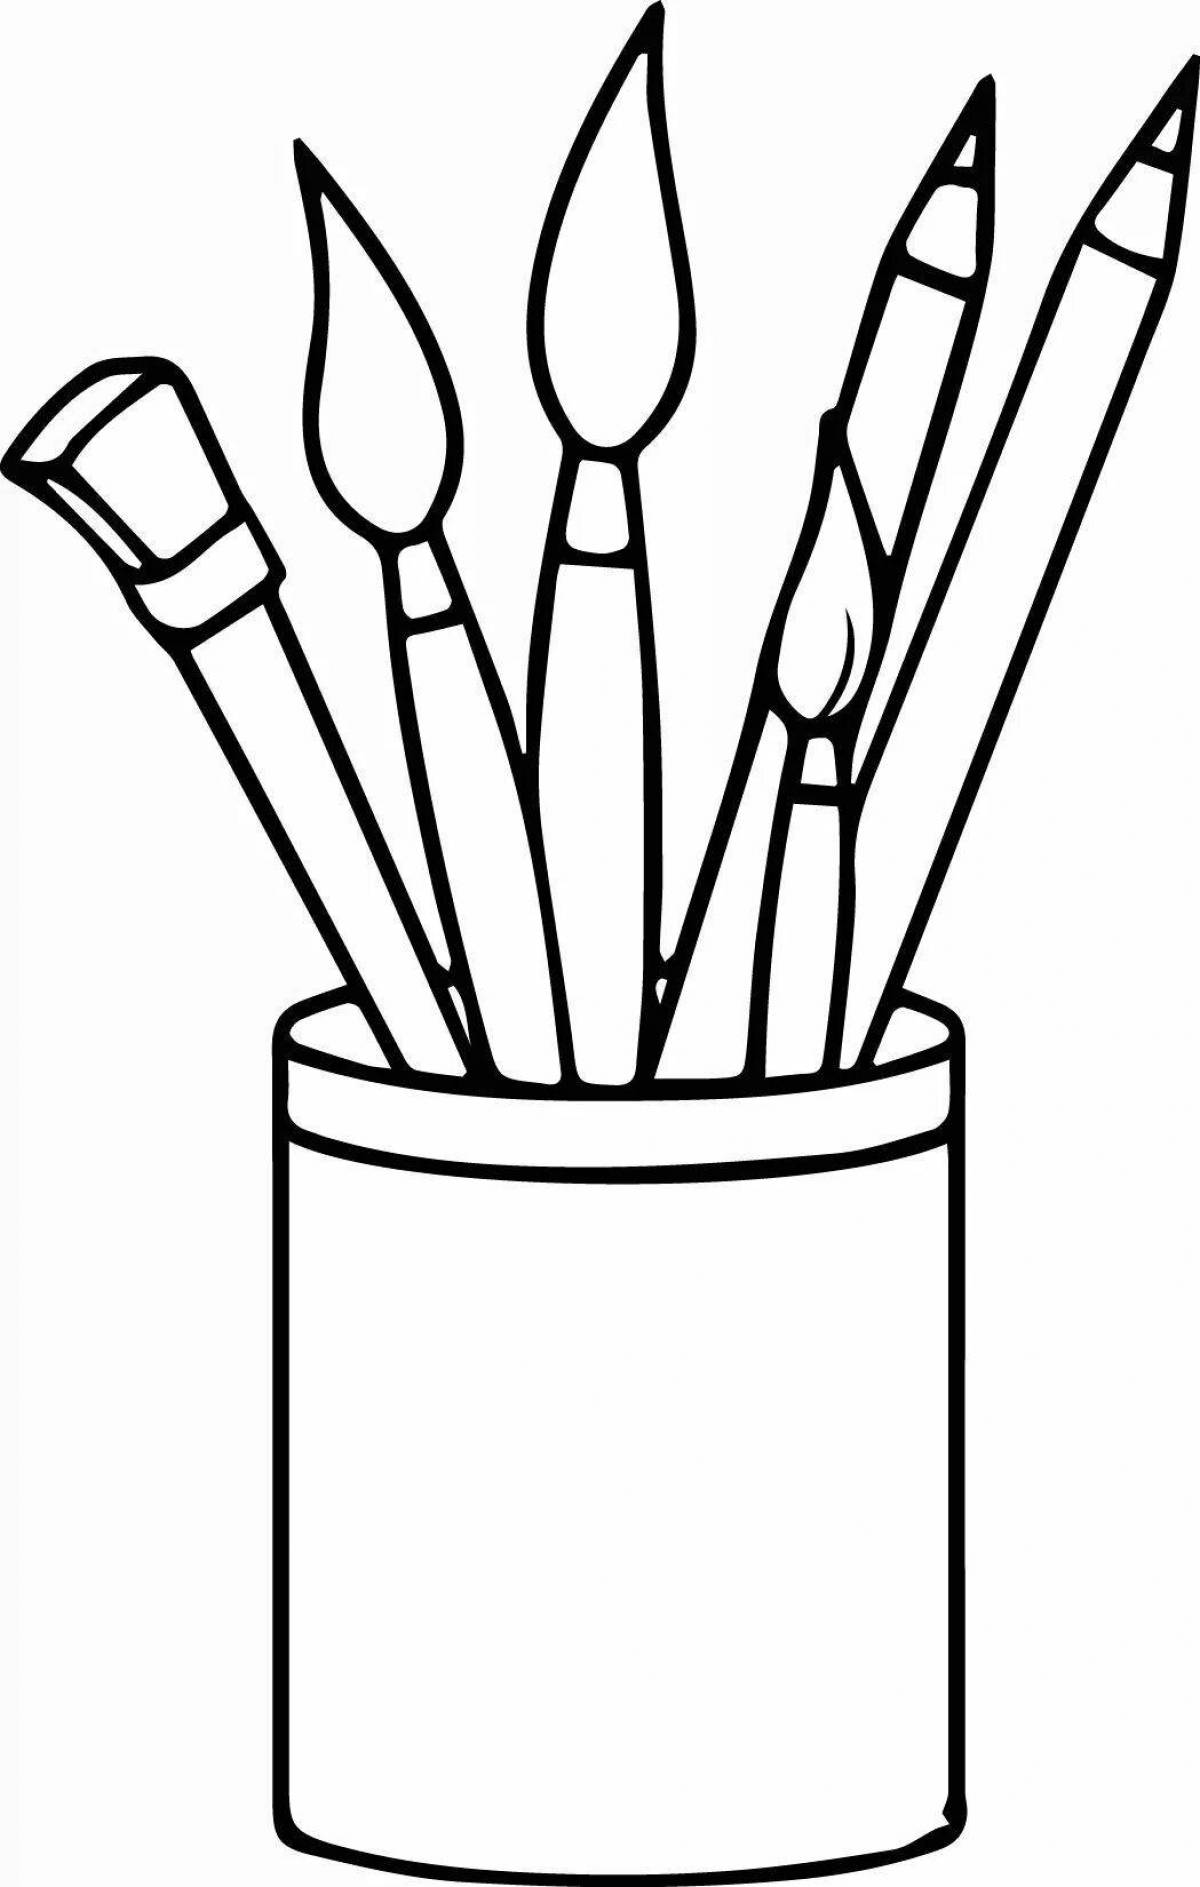 Pre-made brushes for coloring pages